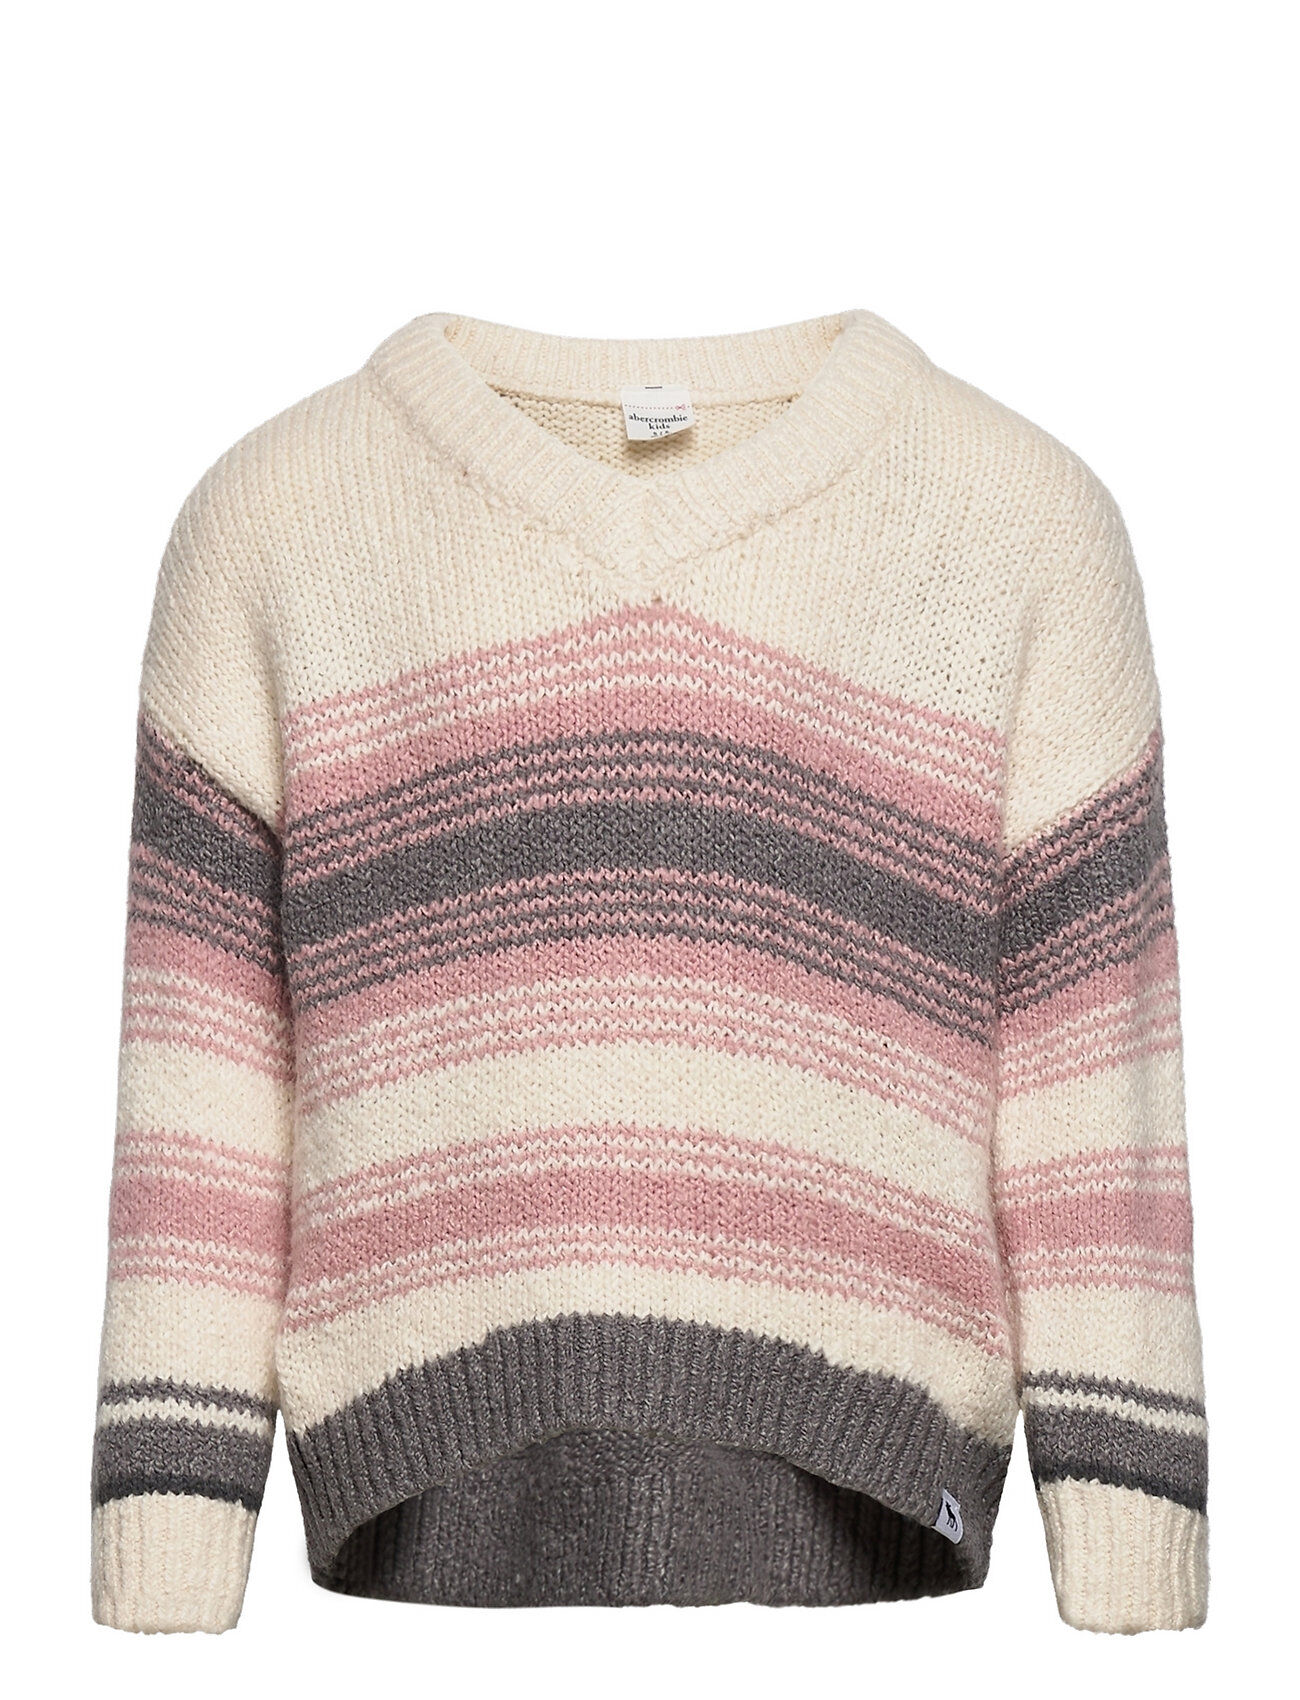 Abercrombie & Fitch Kids Girls Sweaters Pullover Rosa Abercrombie & Fitch